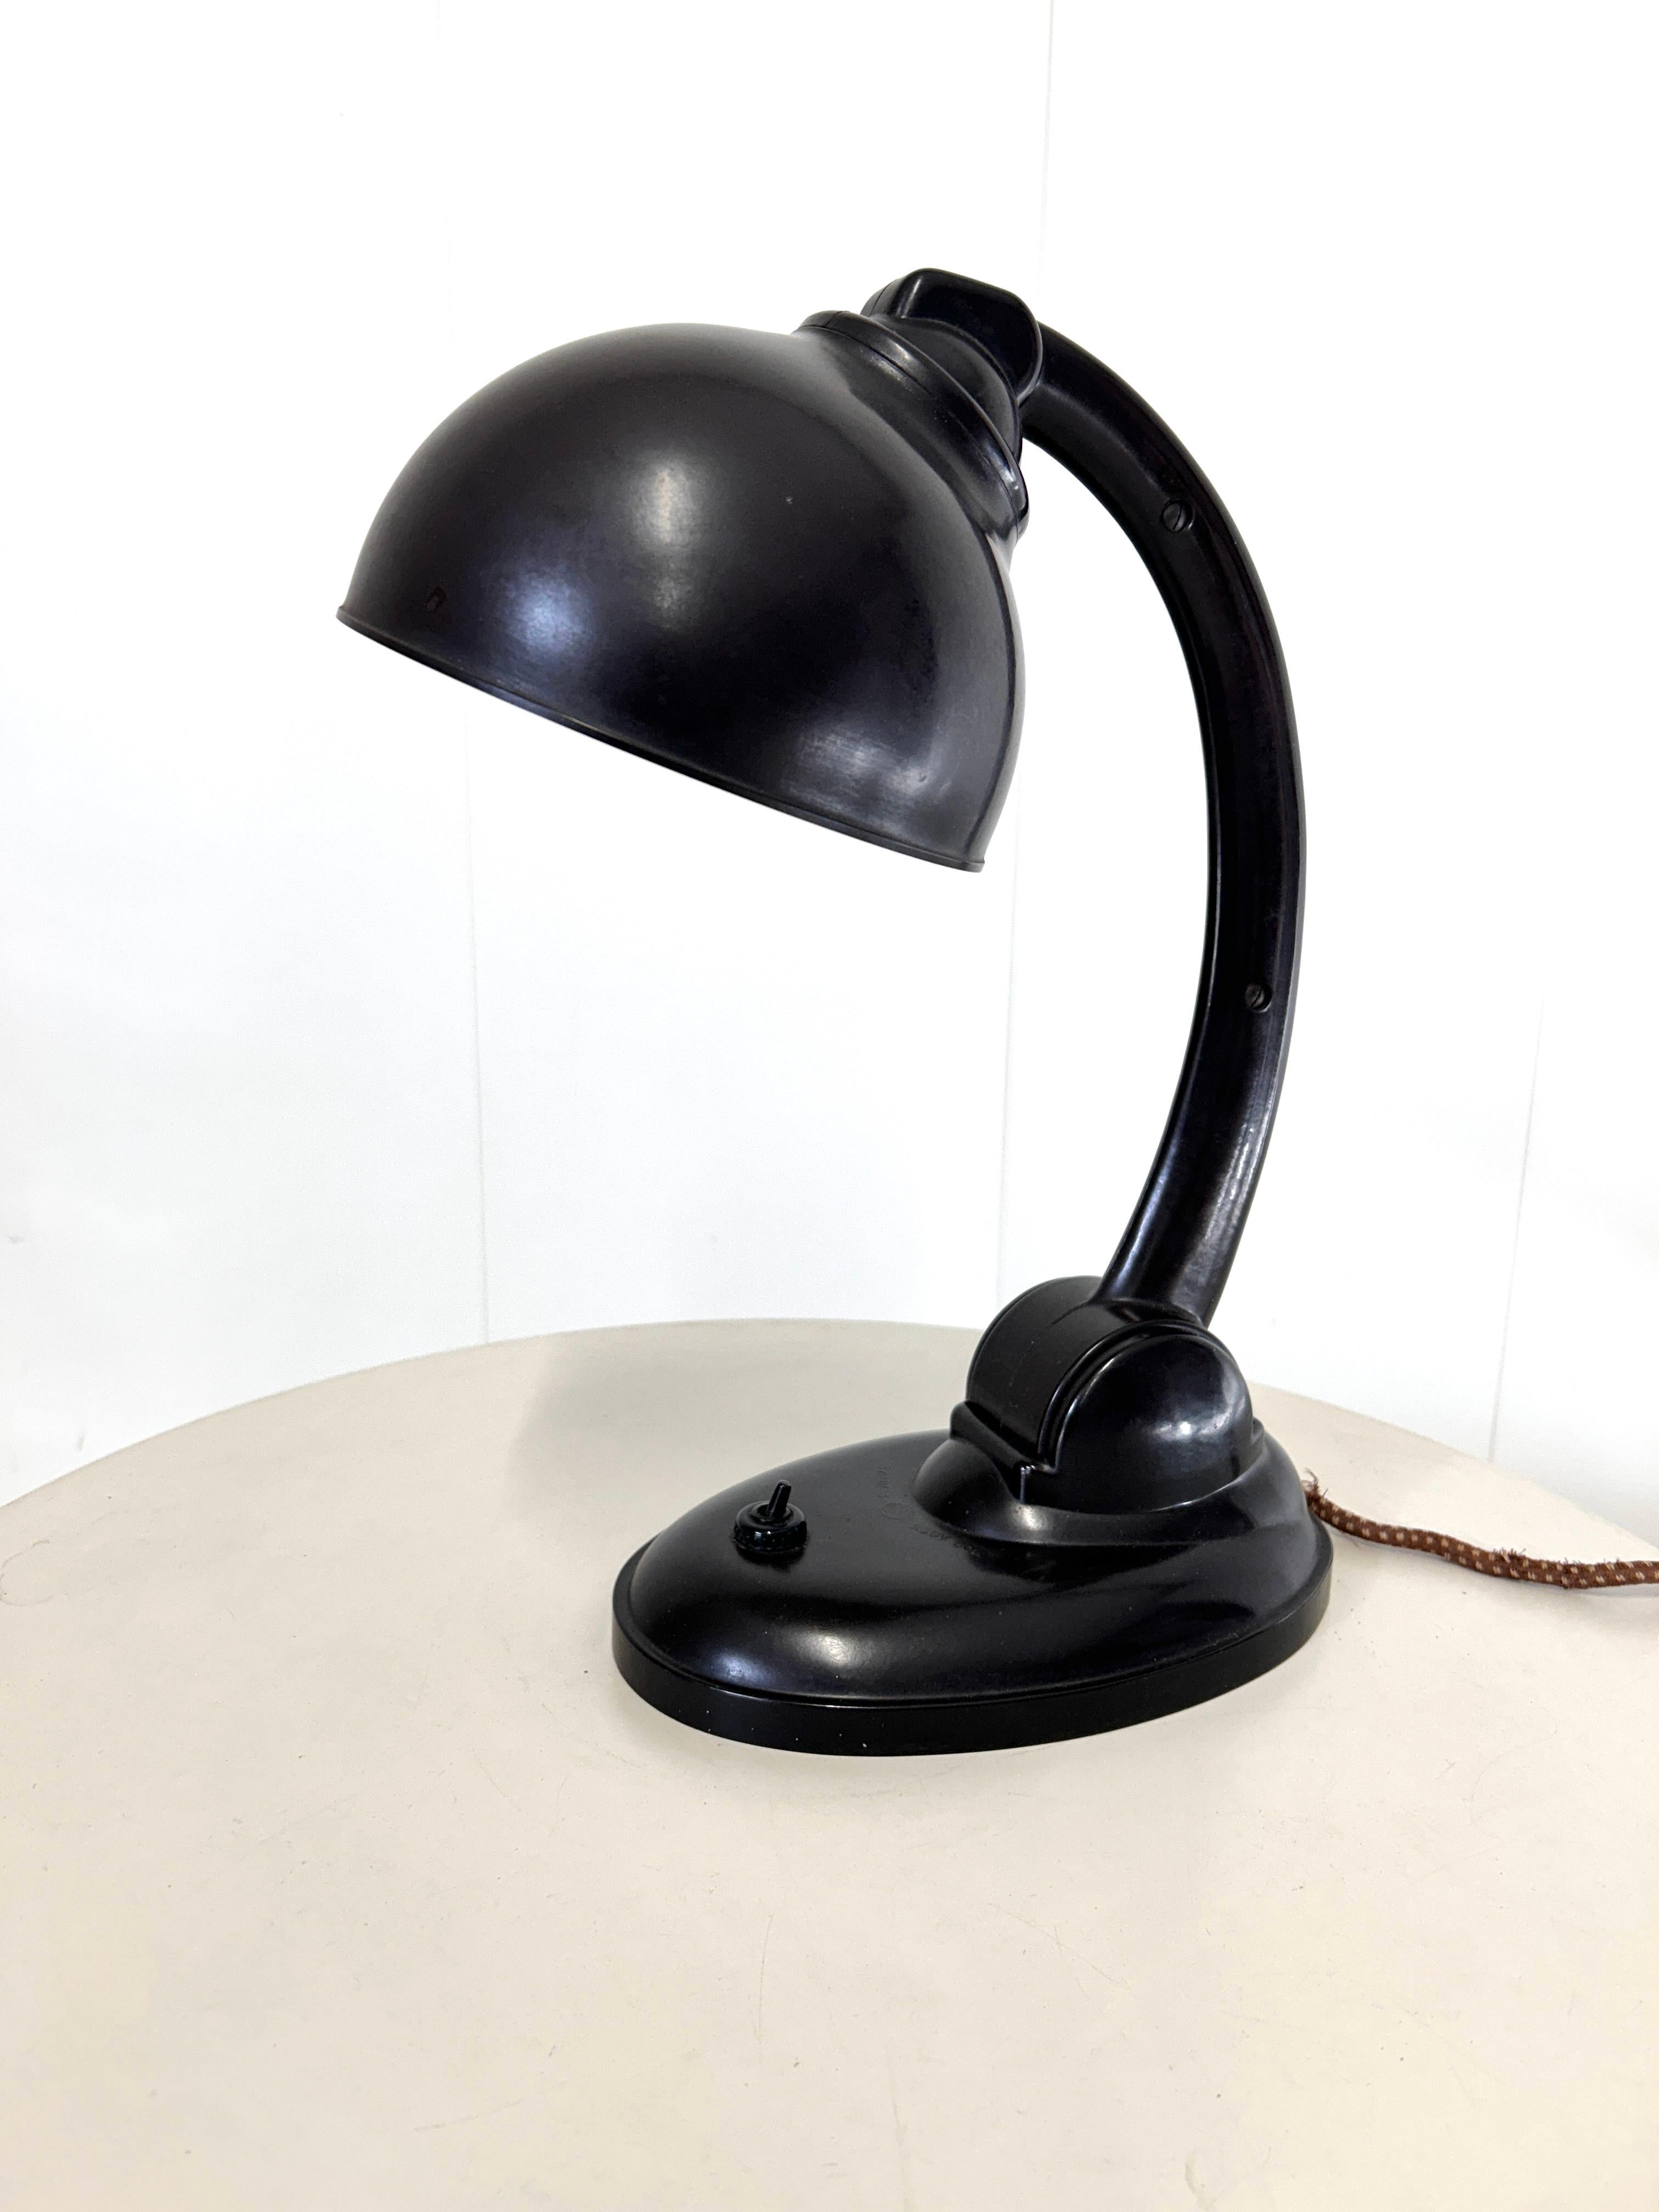 This modernist table lamp was designed in Britain in the 1930s by Eric Kirkham Cole. Cole was the founder and chief designer of the British electronics company EKCO, which specialized in the production of radios and, later, televisions using new